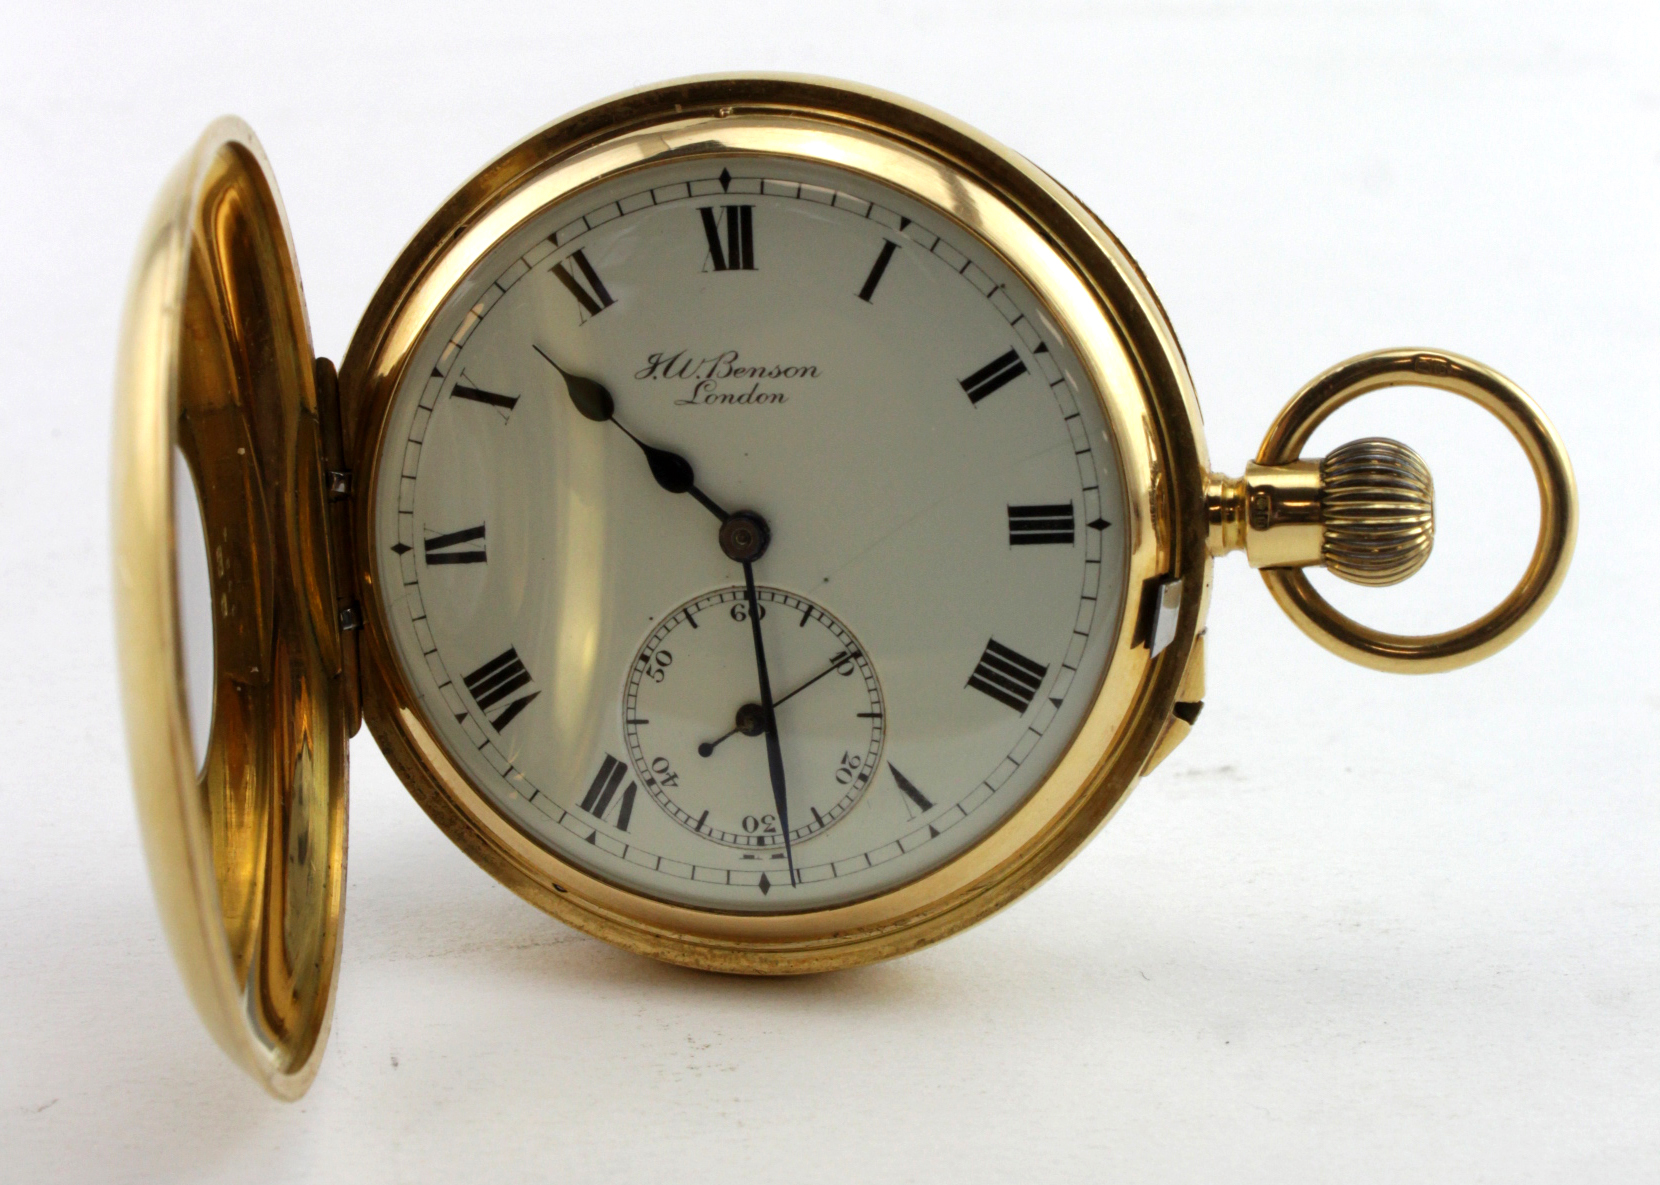 Gents 18ct cased half hunter pocket watch by Benson. Hallmarked London 1925. The white dial with